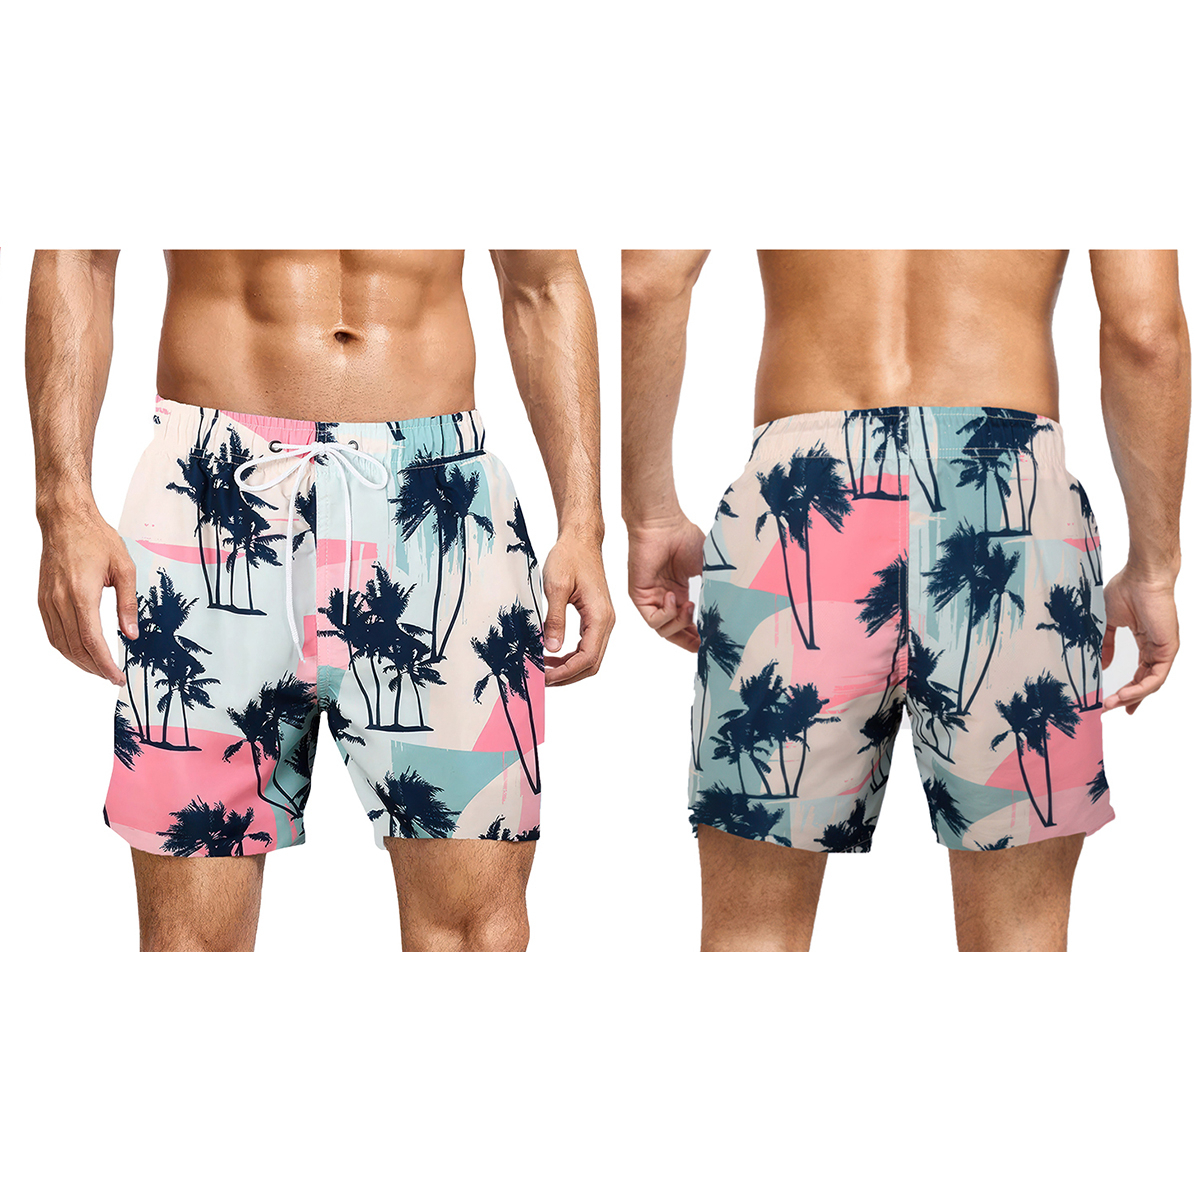 3-Pack: Men's Quick-Dry Solid & Printed Summer Beach Surf Board Swim Trunks Shorts - XX-Large, Solid